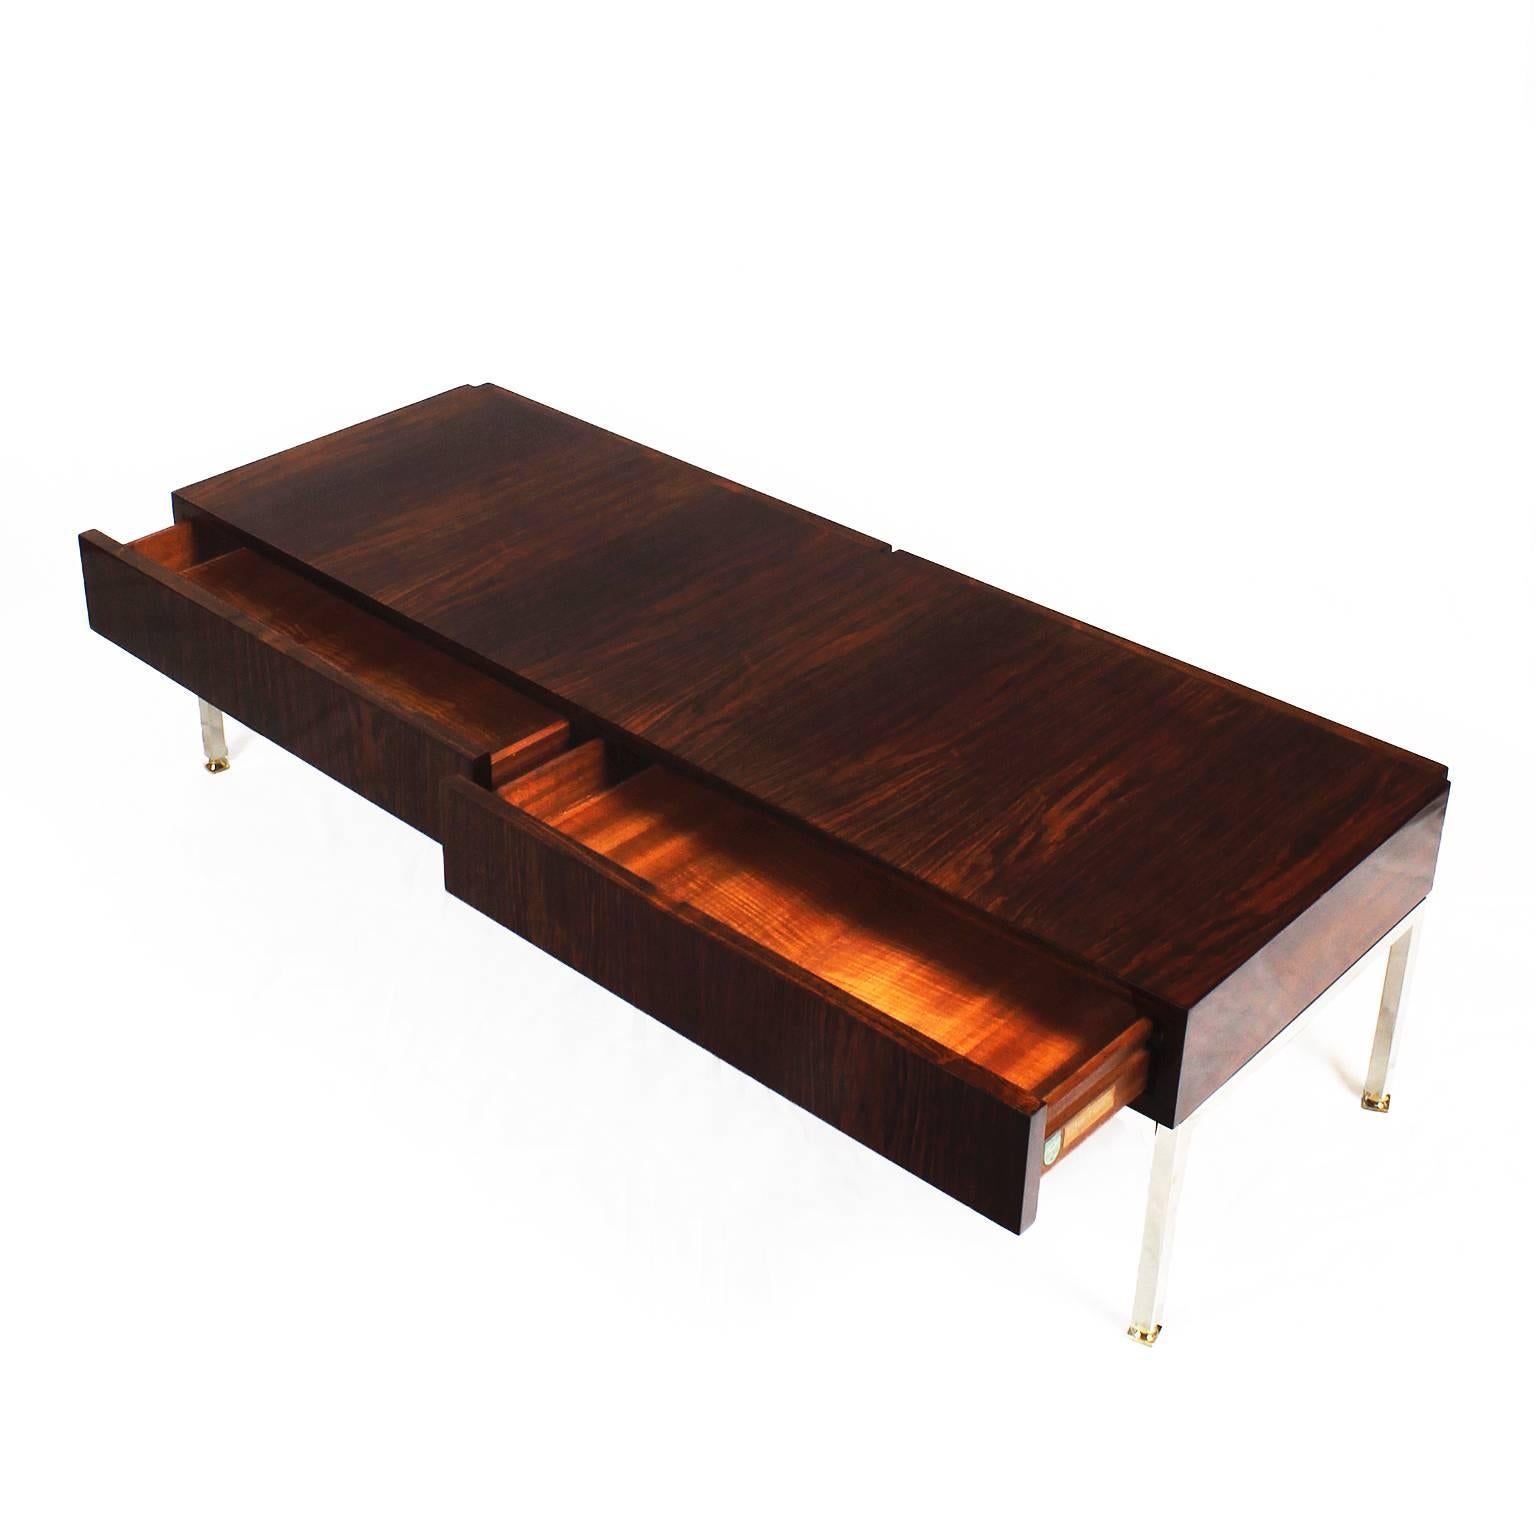 Mid-Century Modern Coffee Table by Luigi Bartolini, Mahogany, 2 drawers - France In Good Condition For Sale In Girona, ES